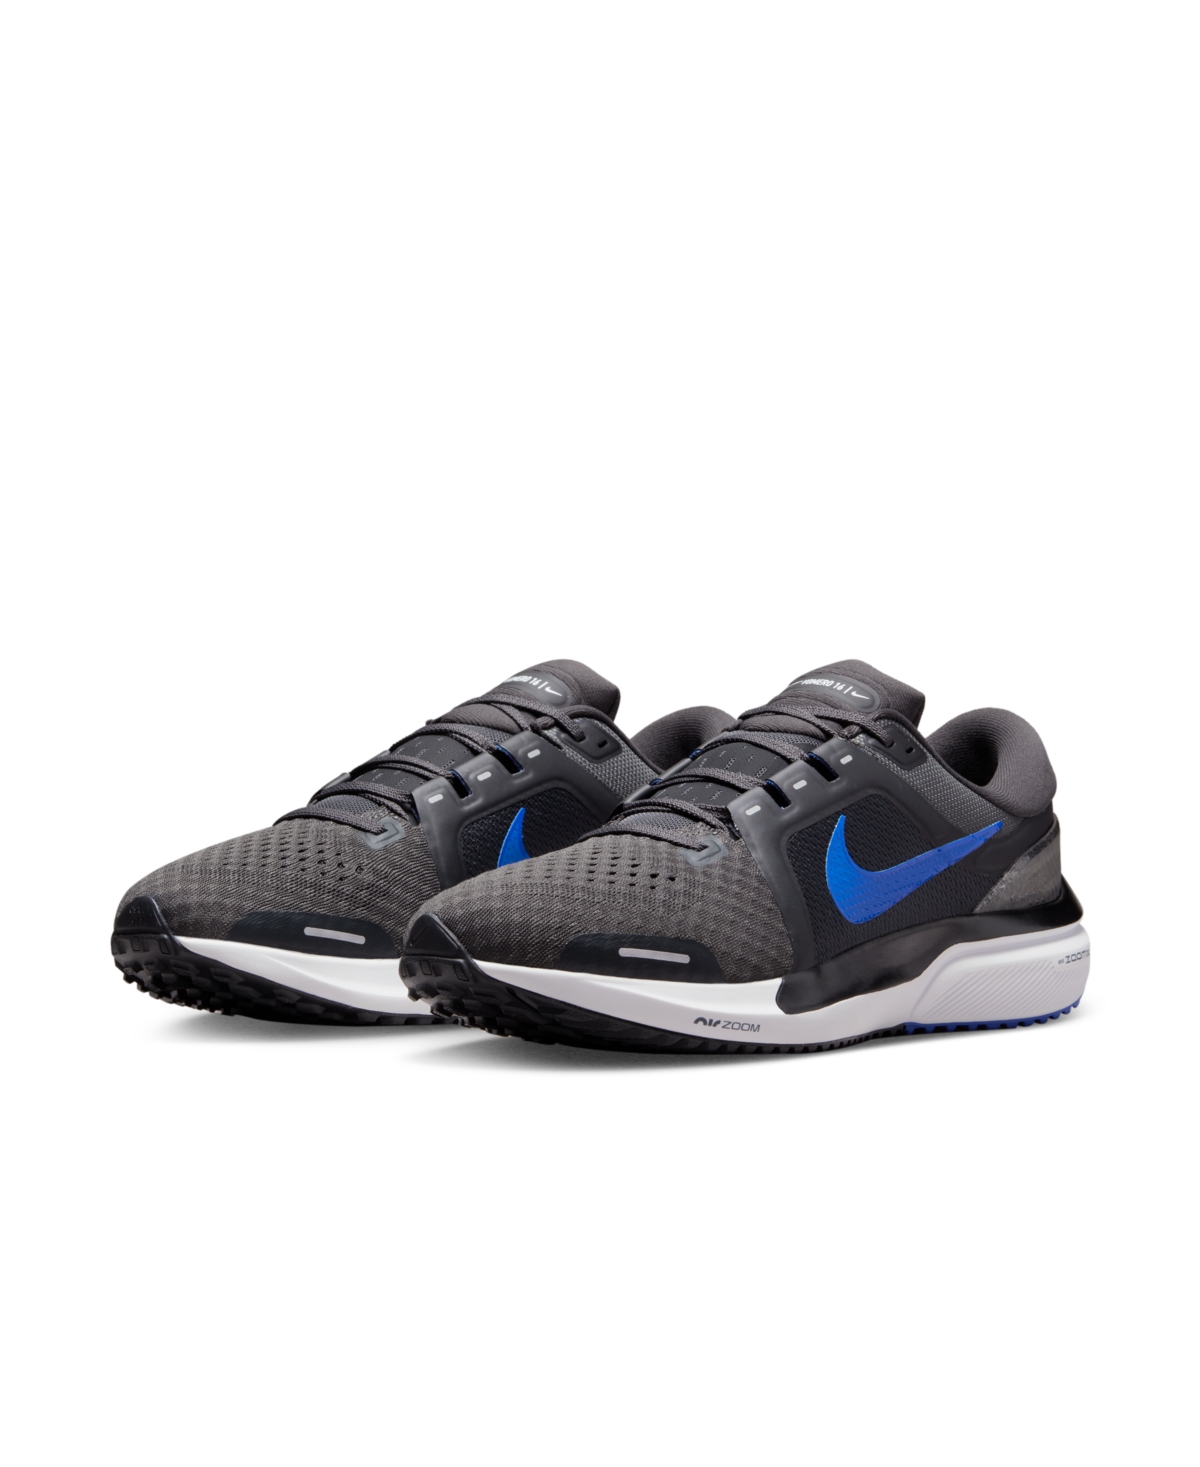 NIKE MEN'S AIR ZOOM VOMERO 16 RUNNING SNEAKERS FROM FINISH LINE